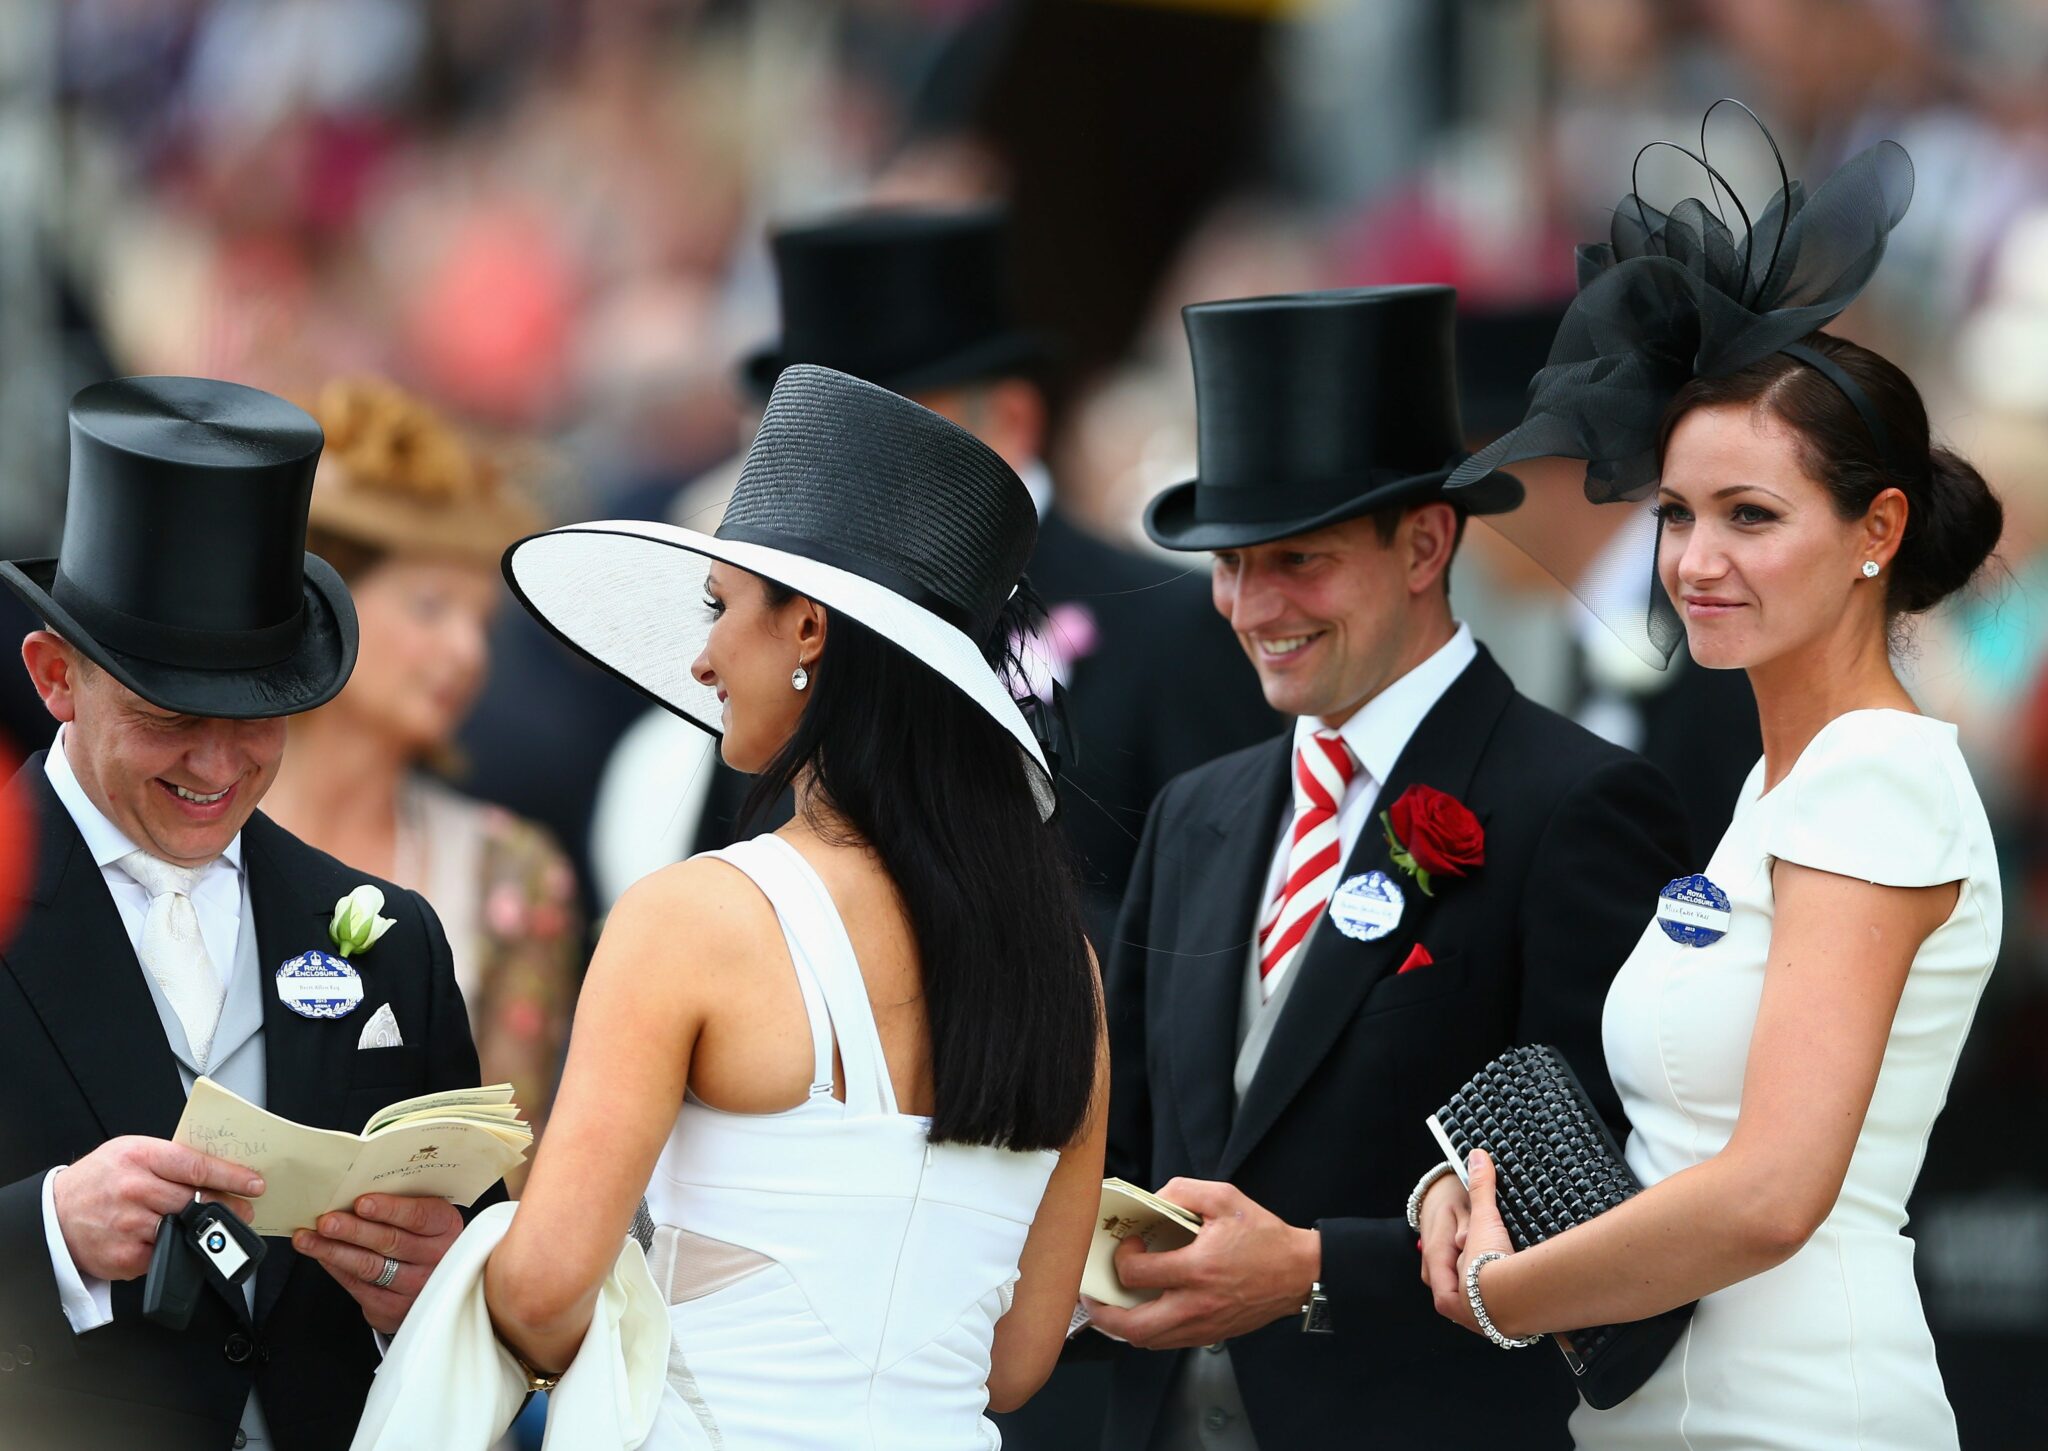 Image of guests dressed in formal wear and top hats